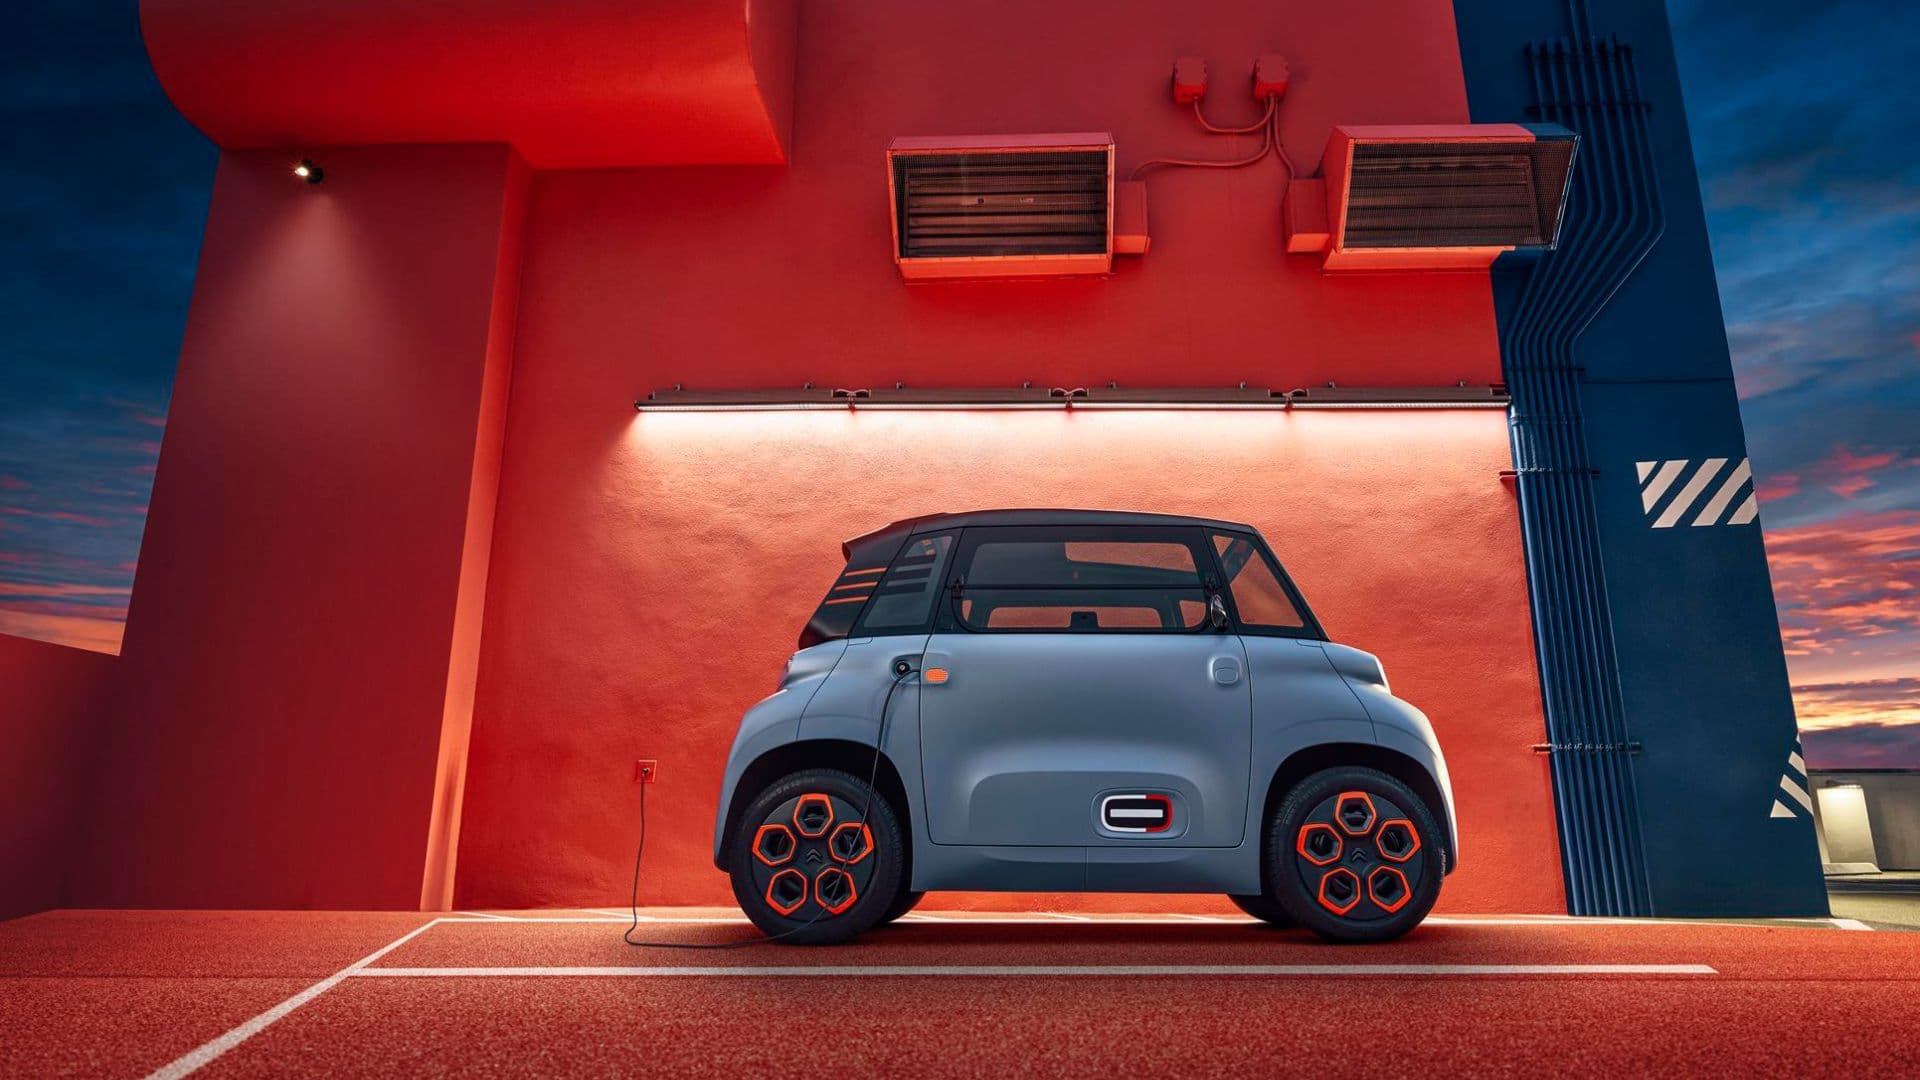 This Delightful Citroen AMI EV City Car Can Be Driven For $22 A Month